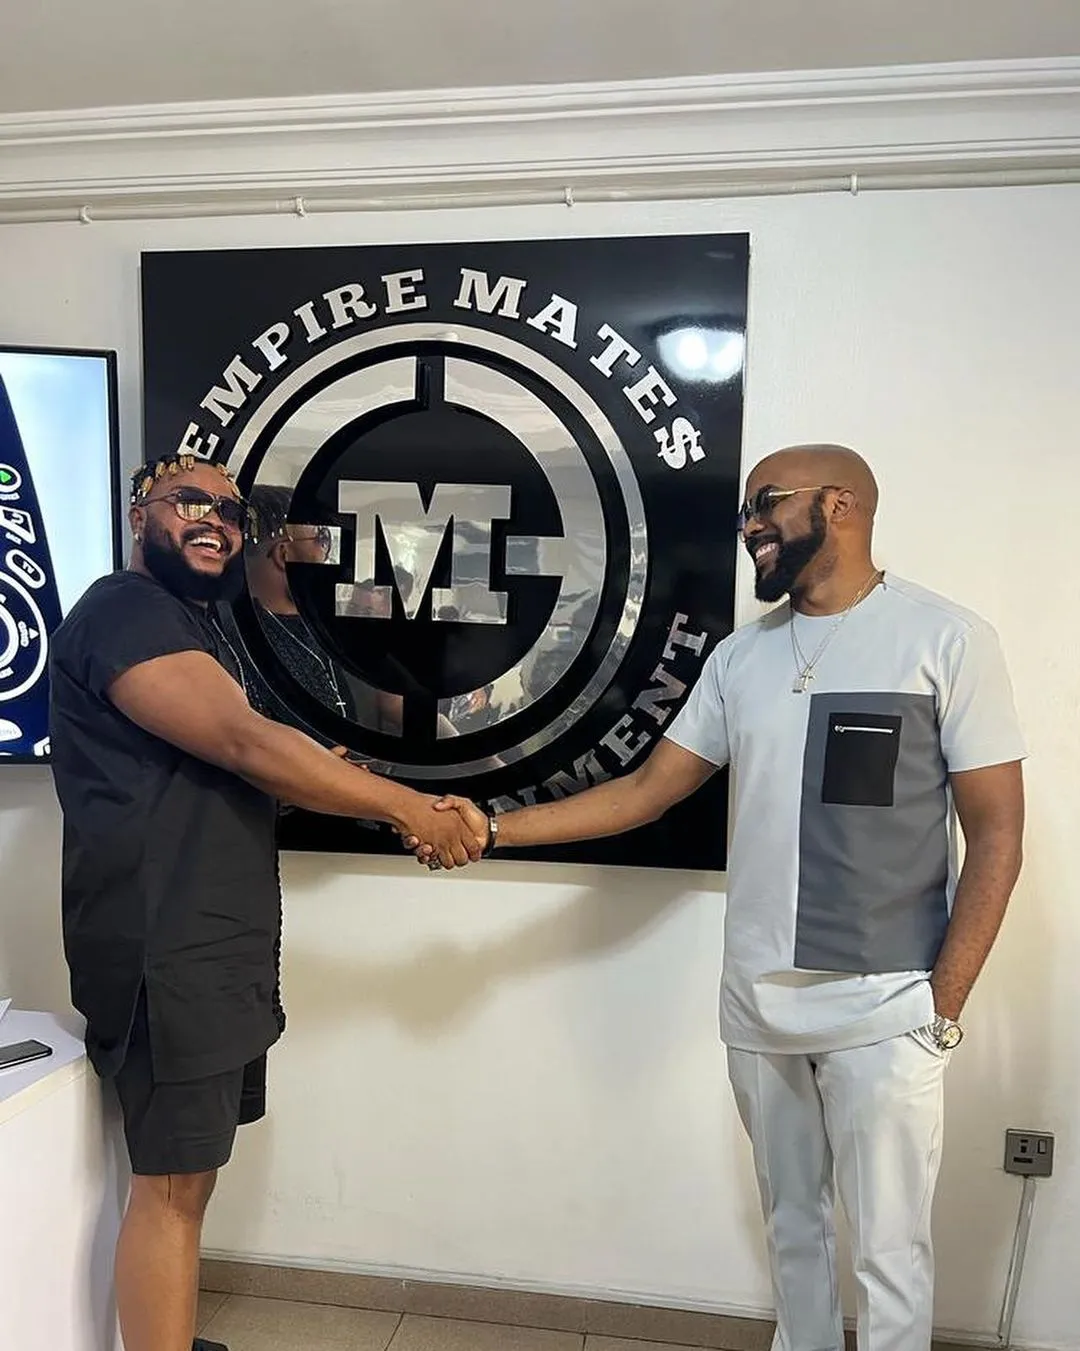 "I did not sign Whitemoney to EME", Banky W says in an interview